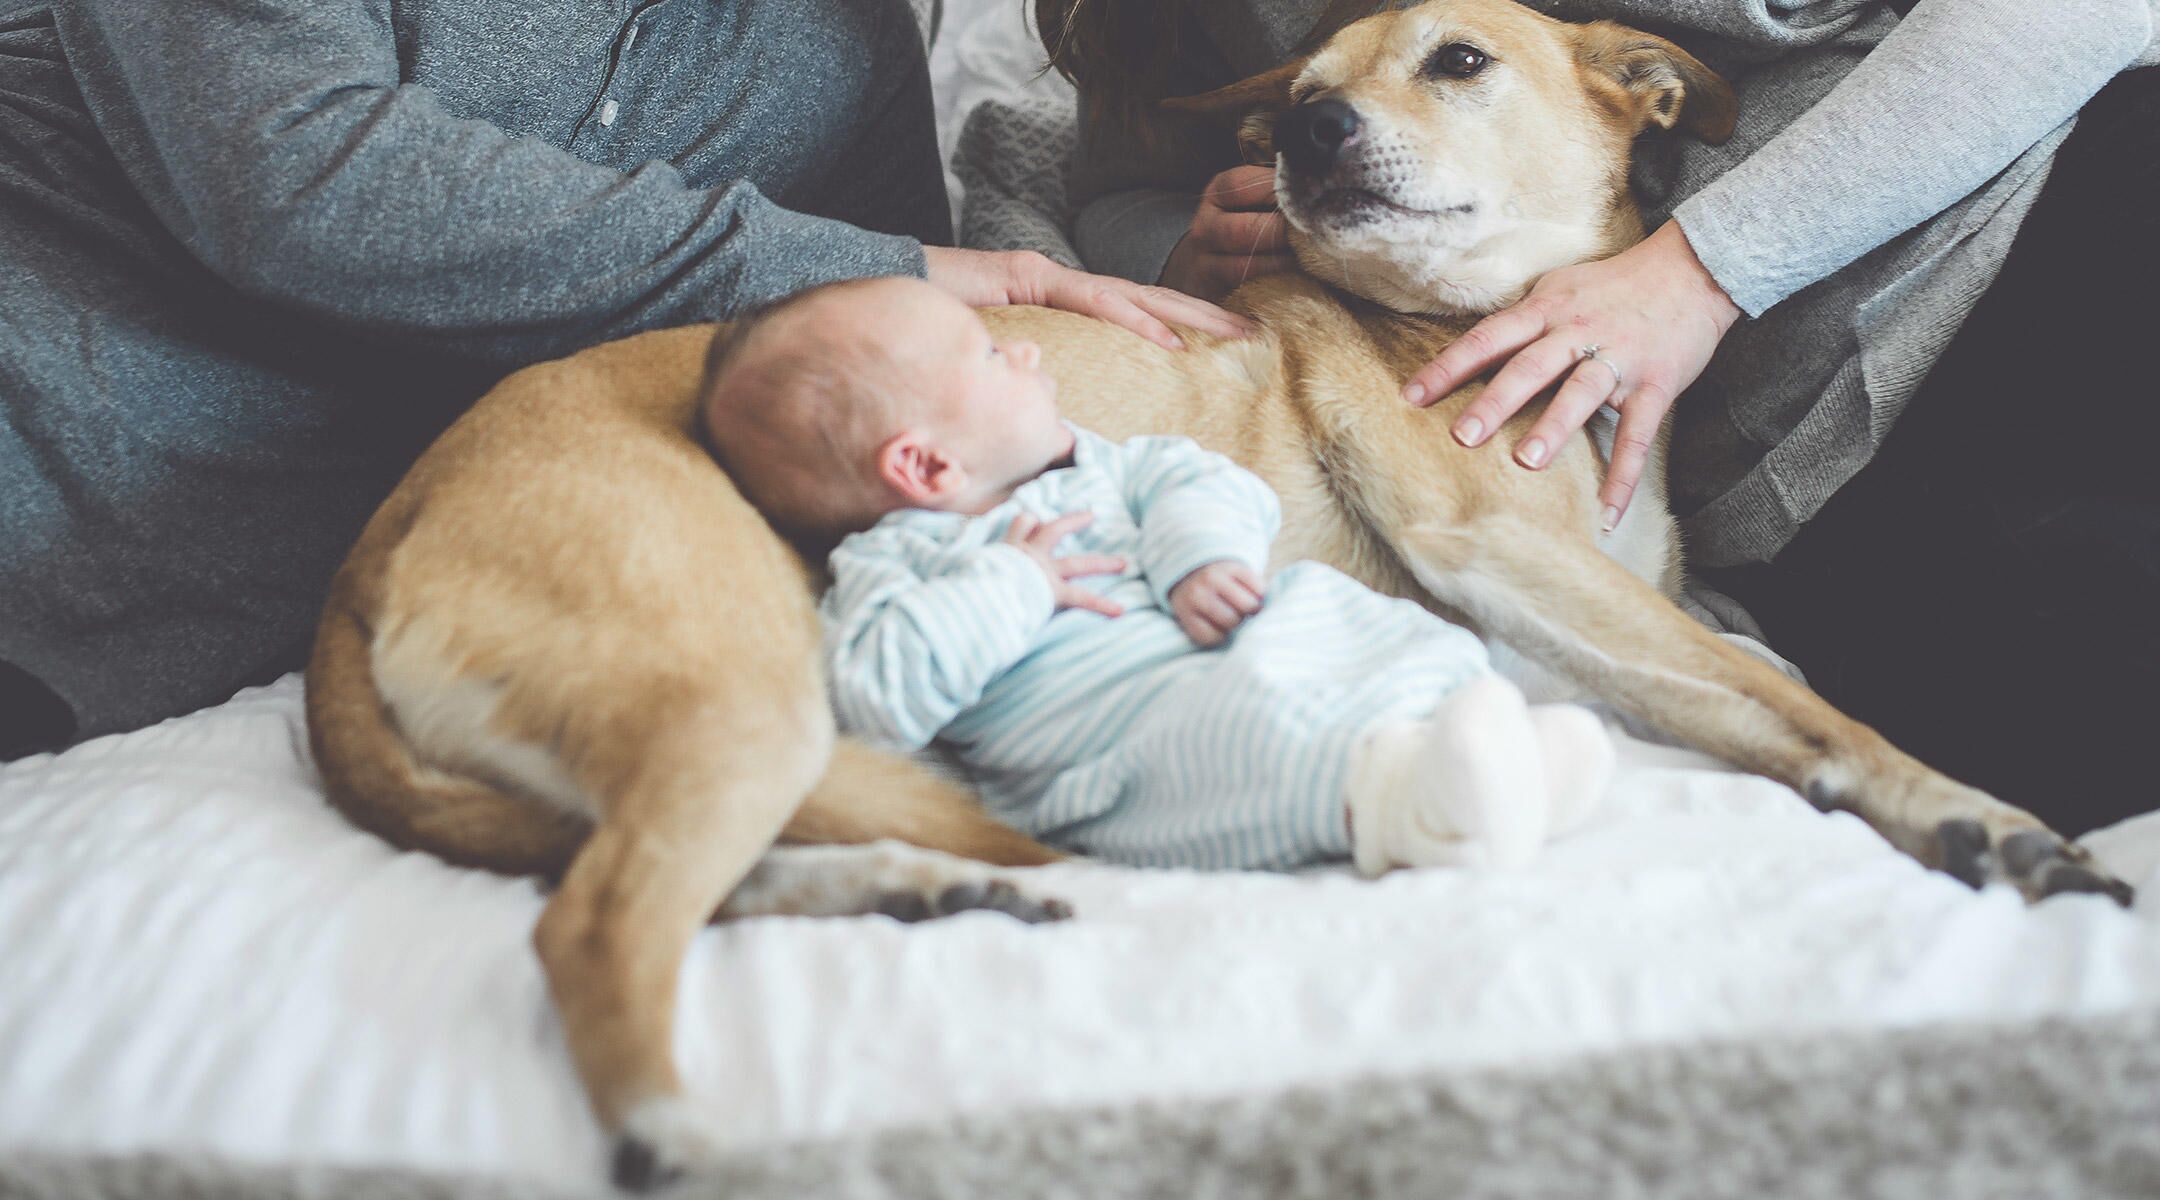 These Popular Baby Names Overlap With Top Pet Names